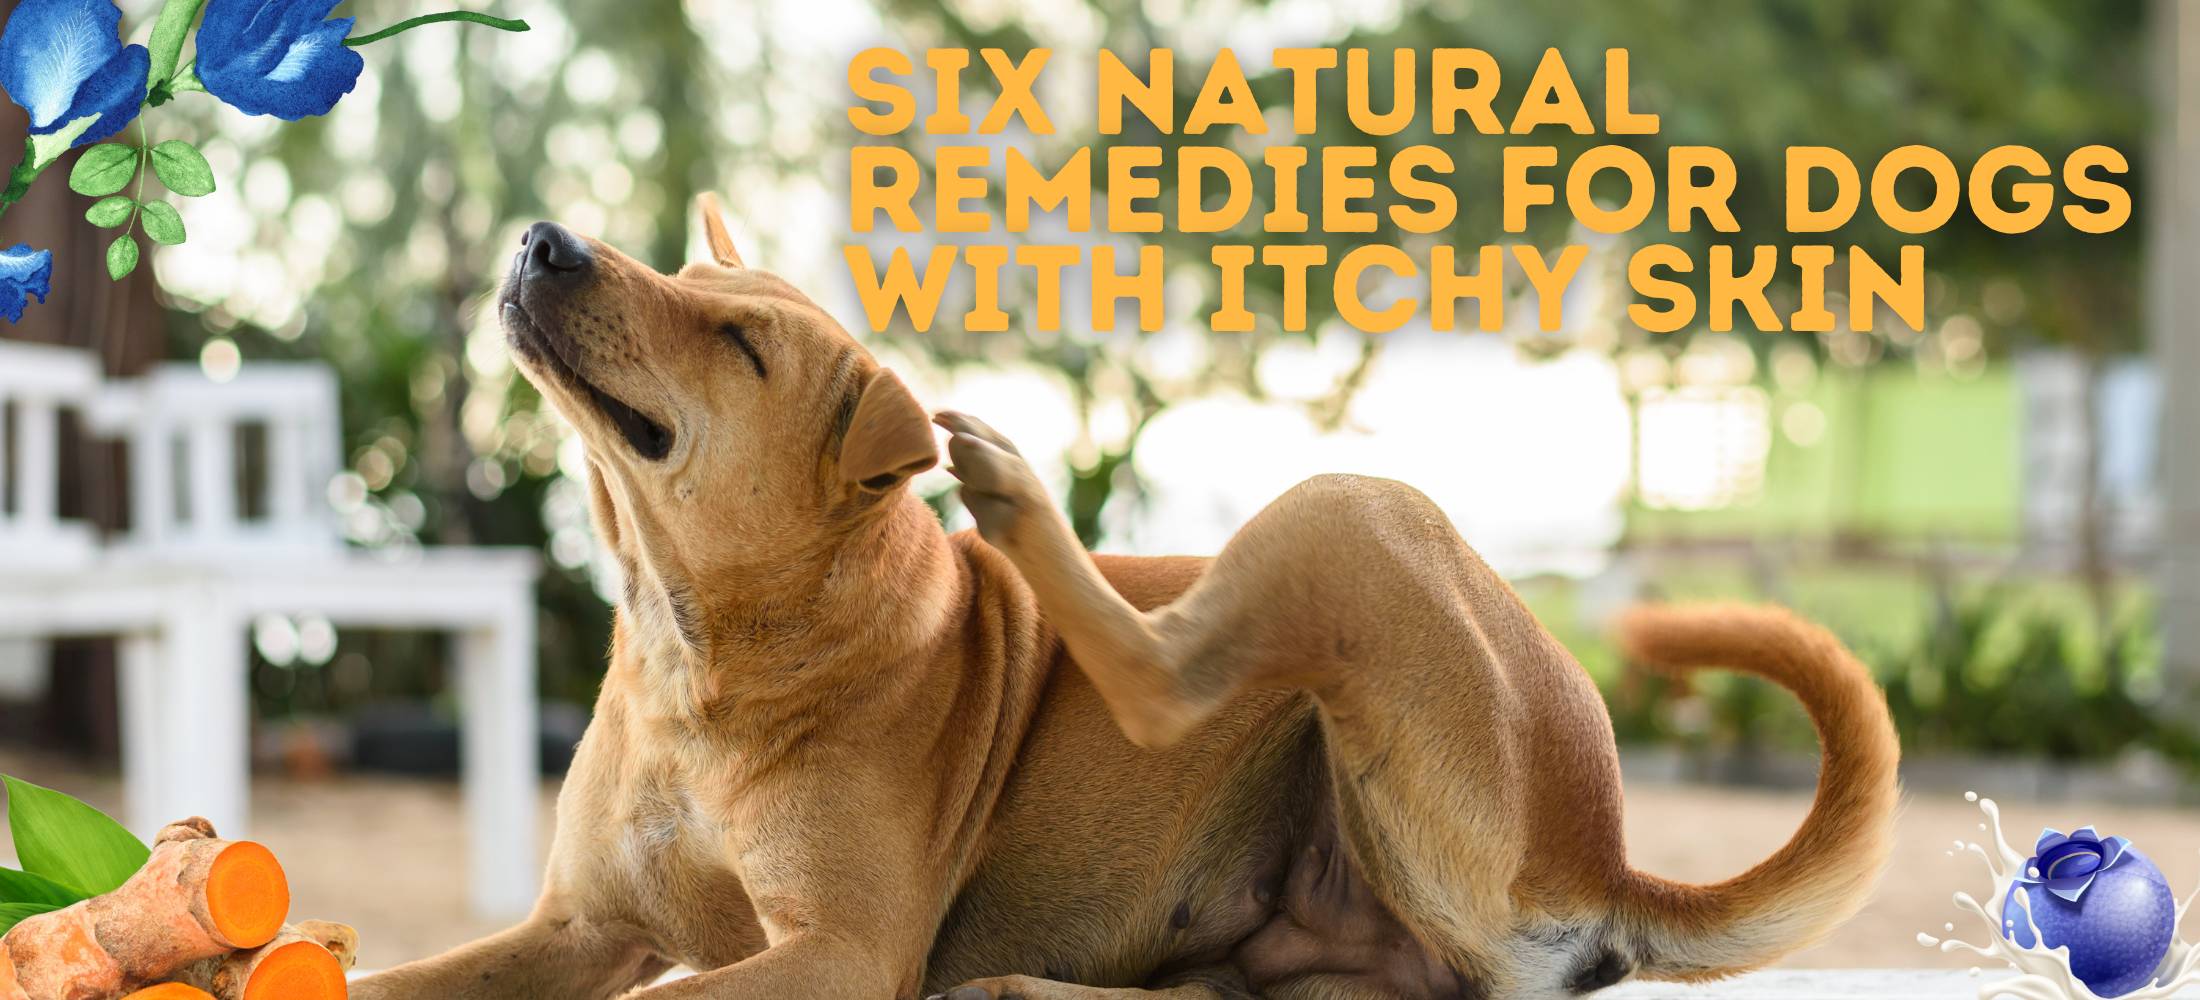 Itchy dog scratching his skin with natural superfood remedies